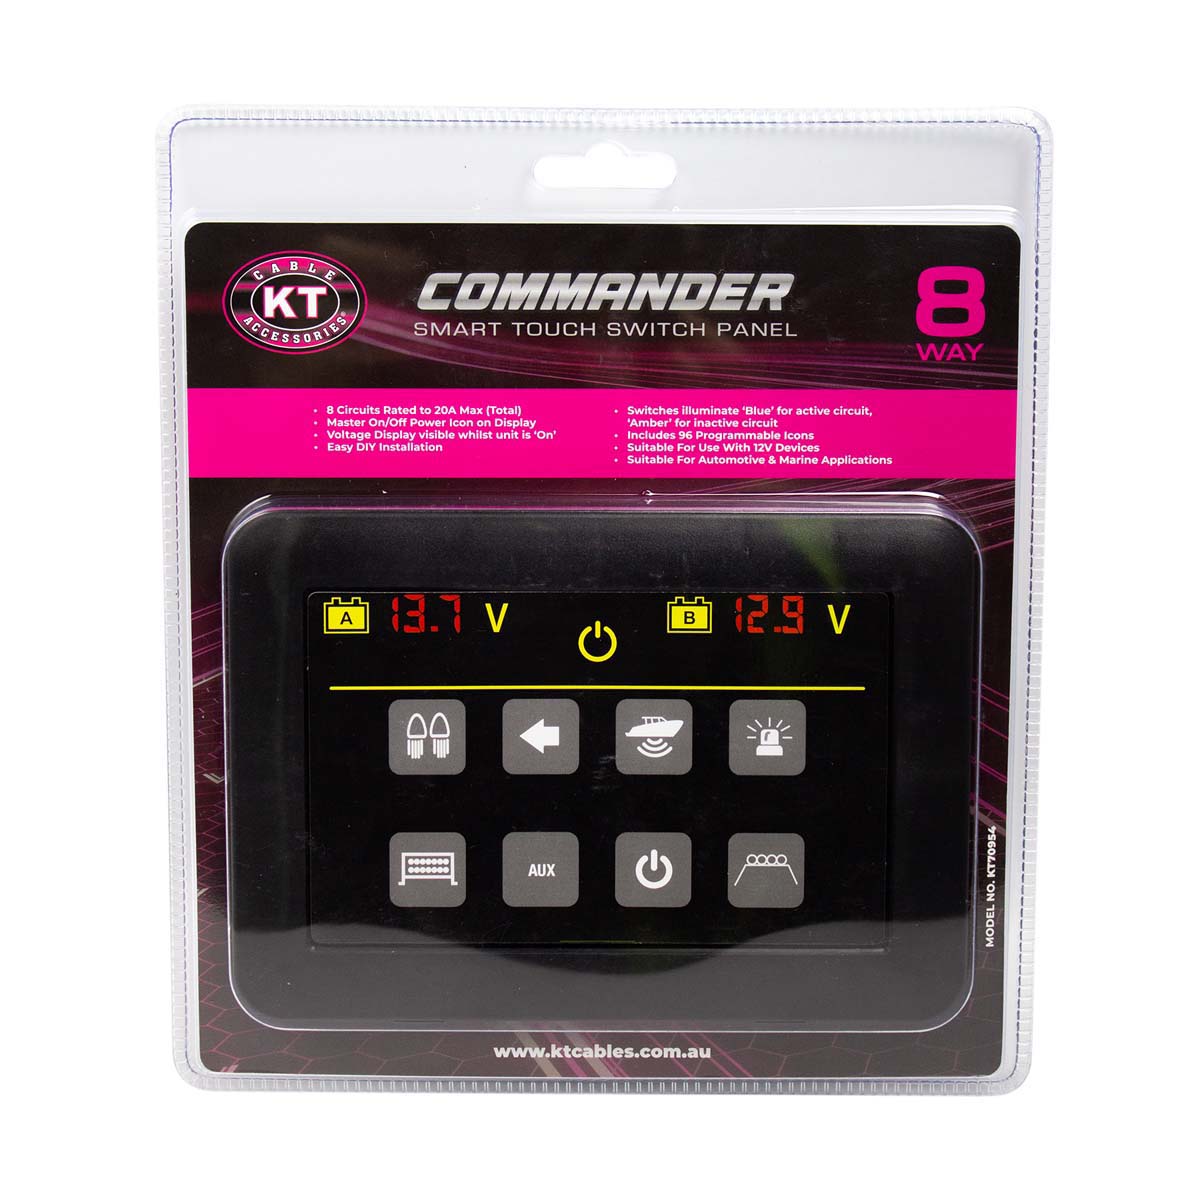 KT Cables Commander 8 Way Smart-Touch Switch Panel